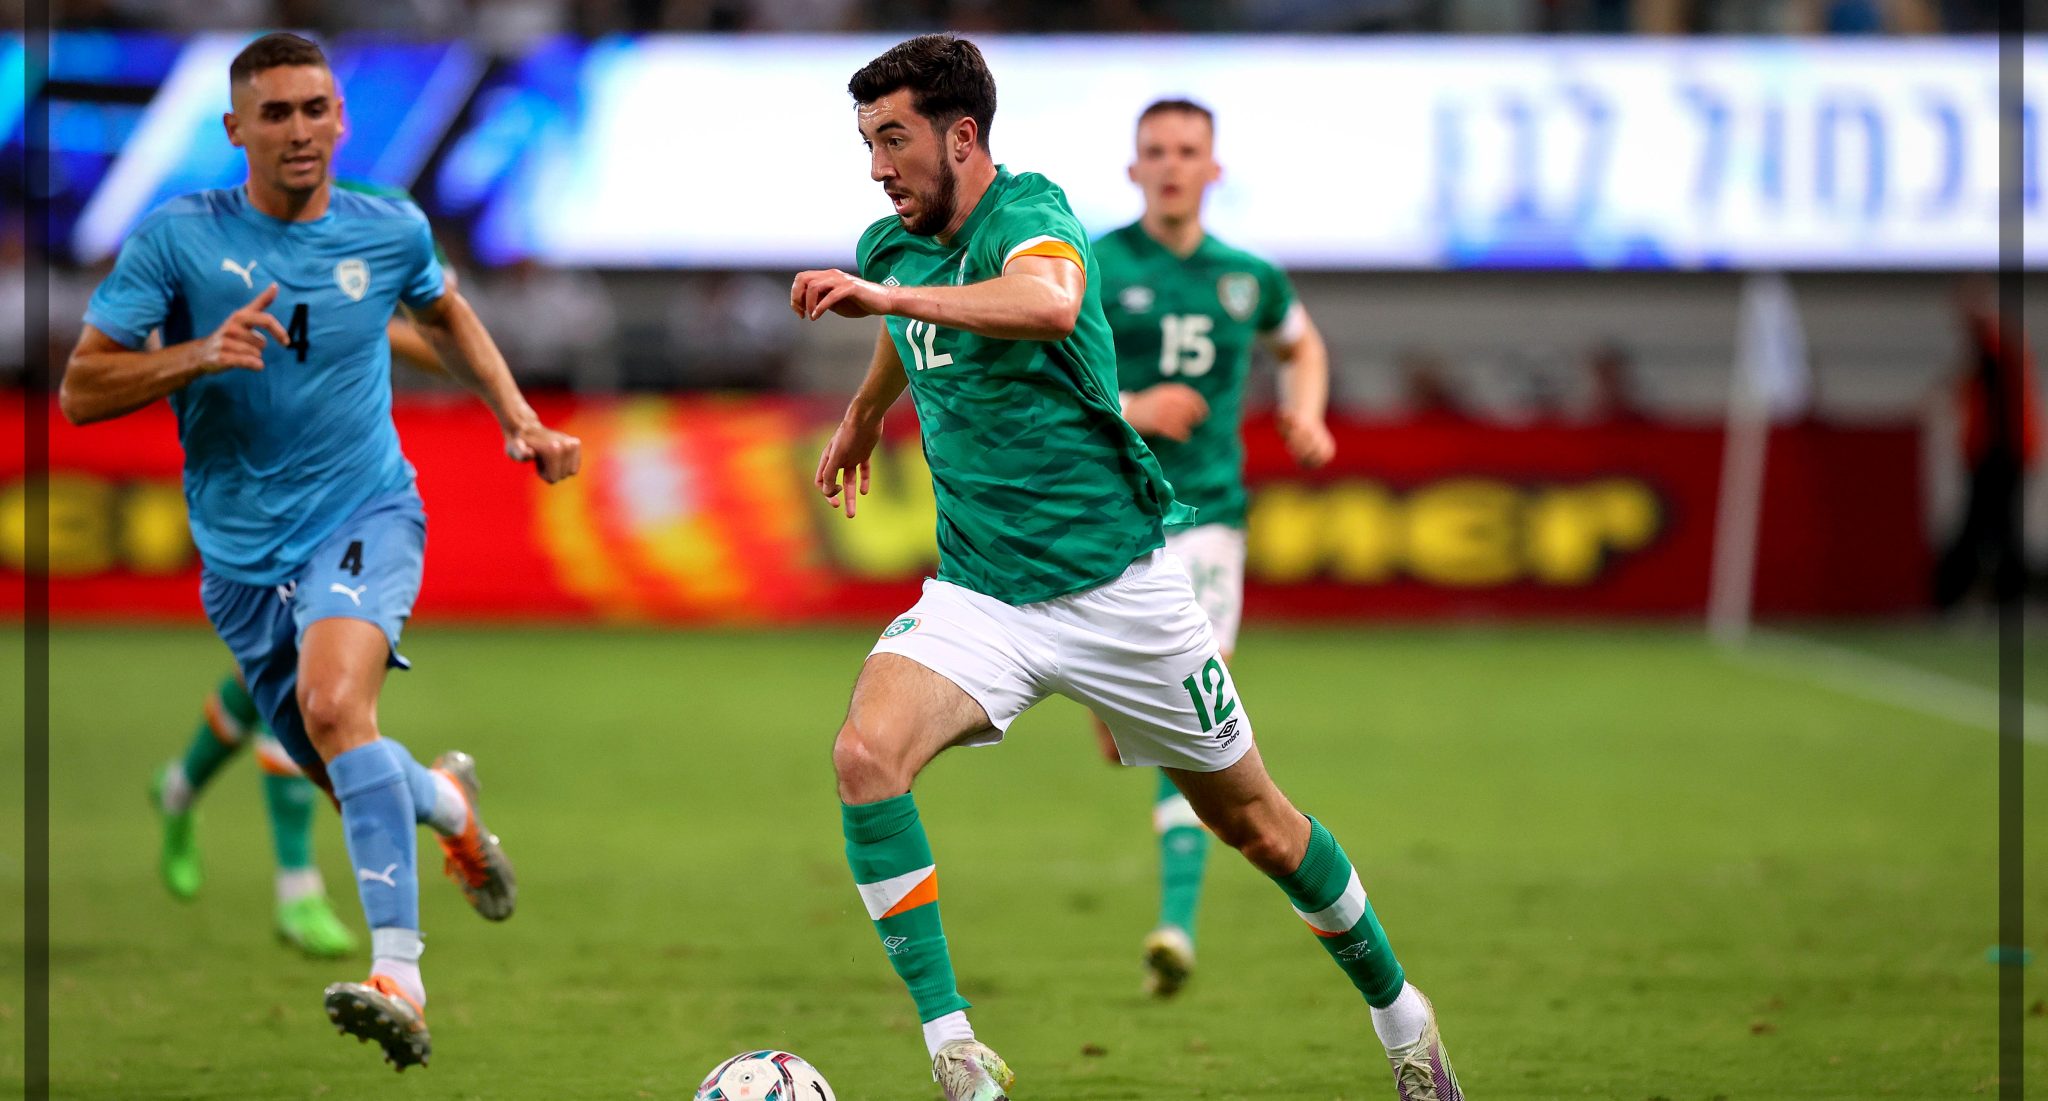 The uncapped Irish players to watch out for in the Championship this season